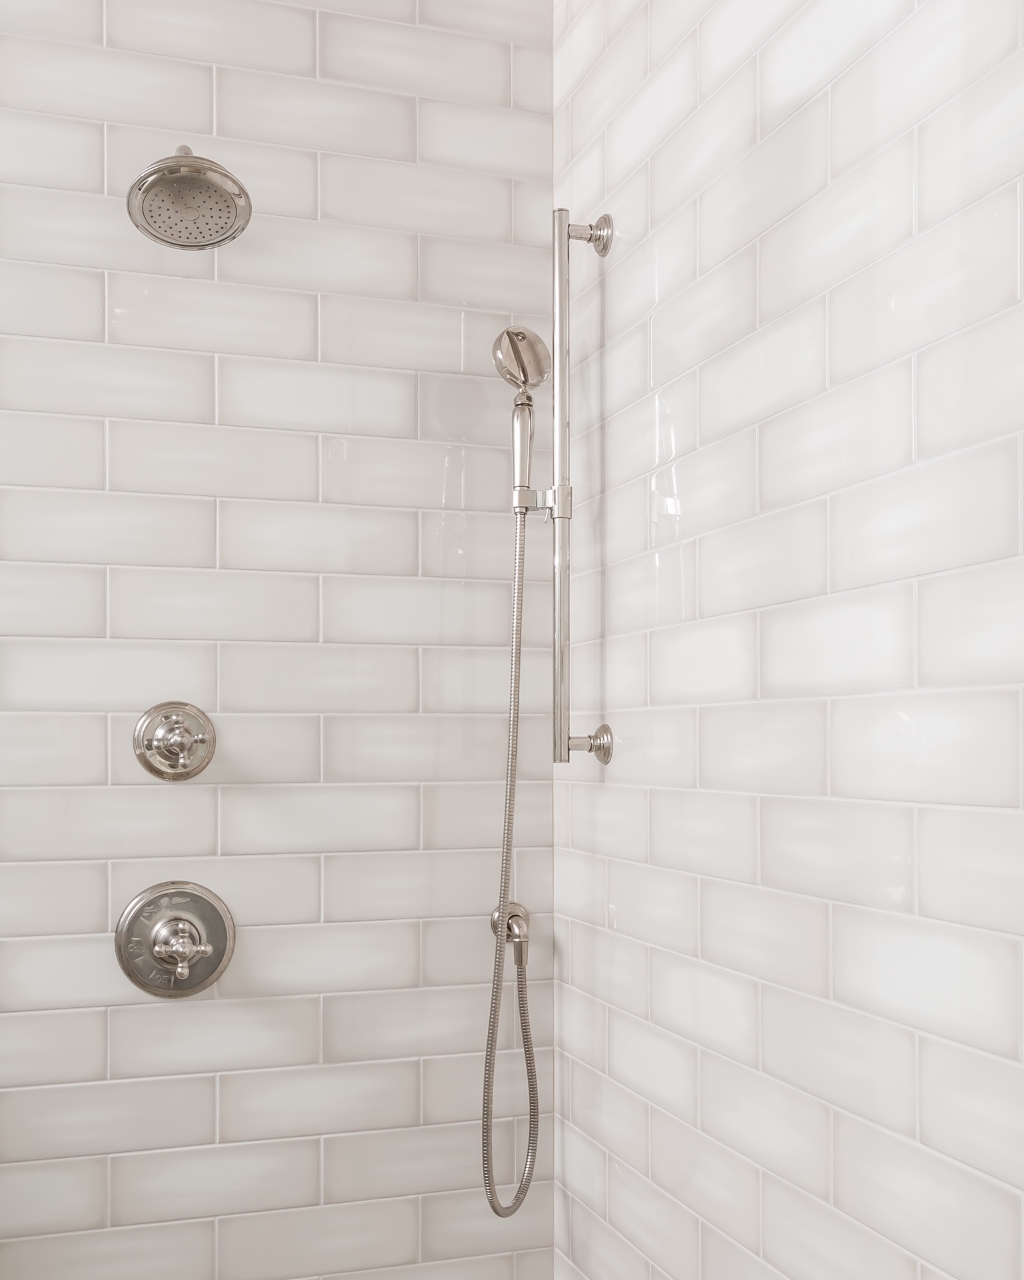 a shower head and handset in a white tiled bathroom